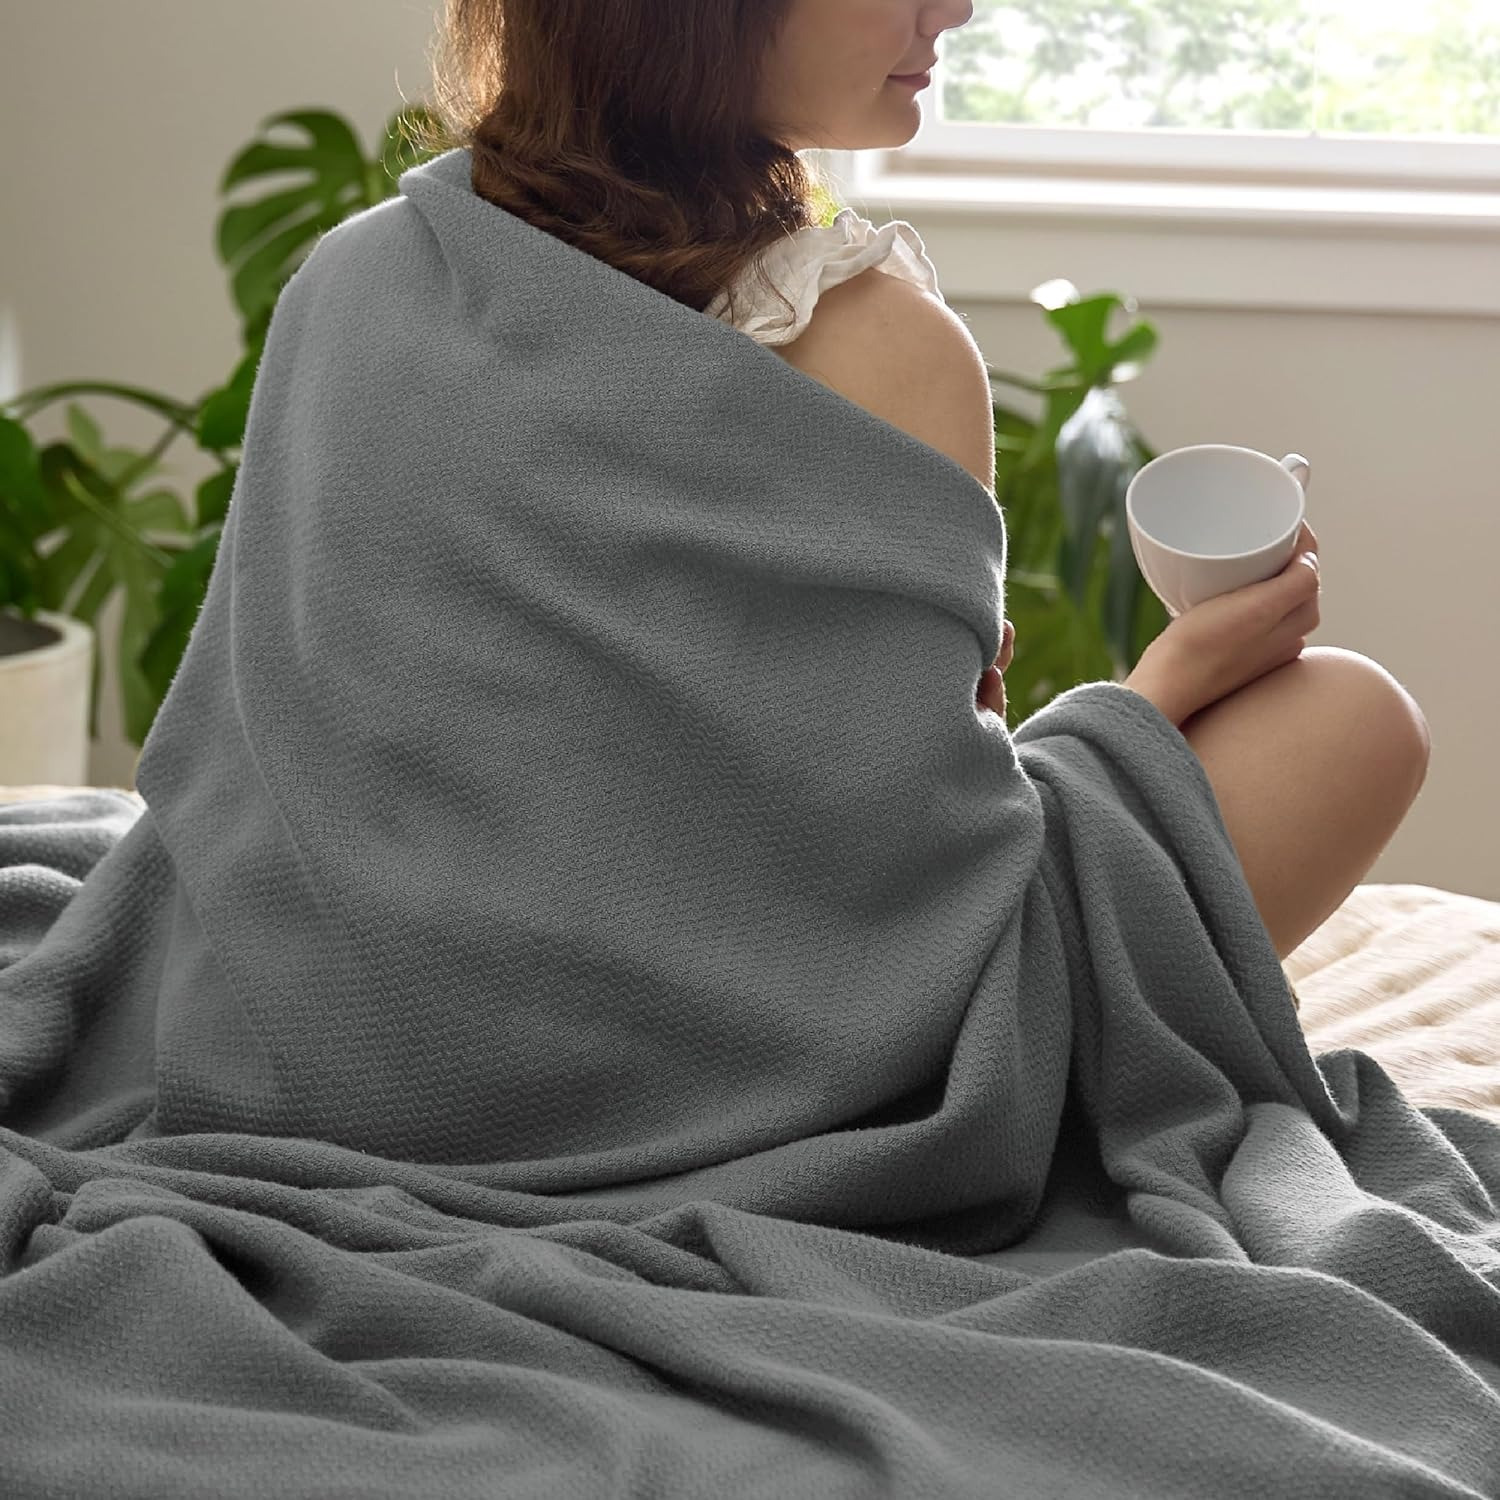 

Bedsure 100% Cotton Blanket For Bed - Soft Cozy Herringbone Woven Blanket For Summer, Breathable And Lightweight Thermal Blanket